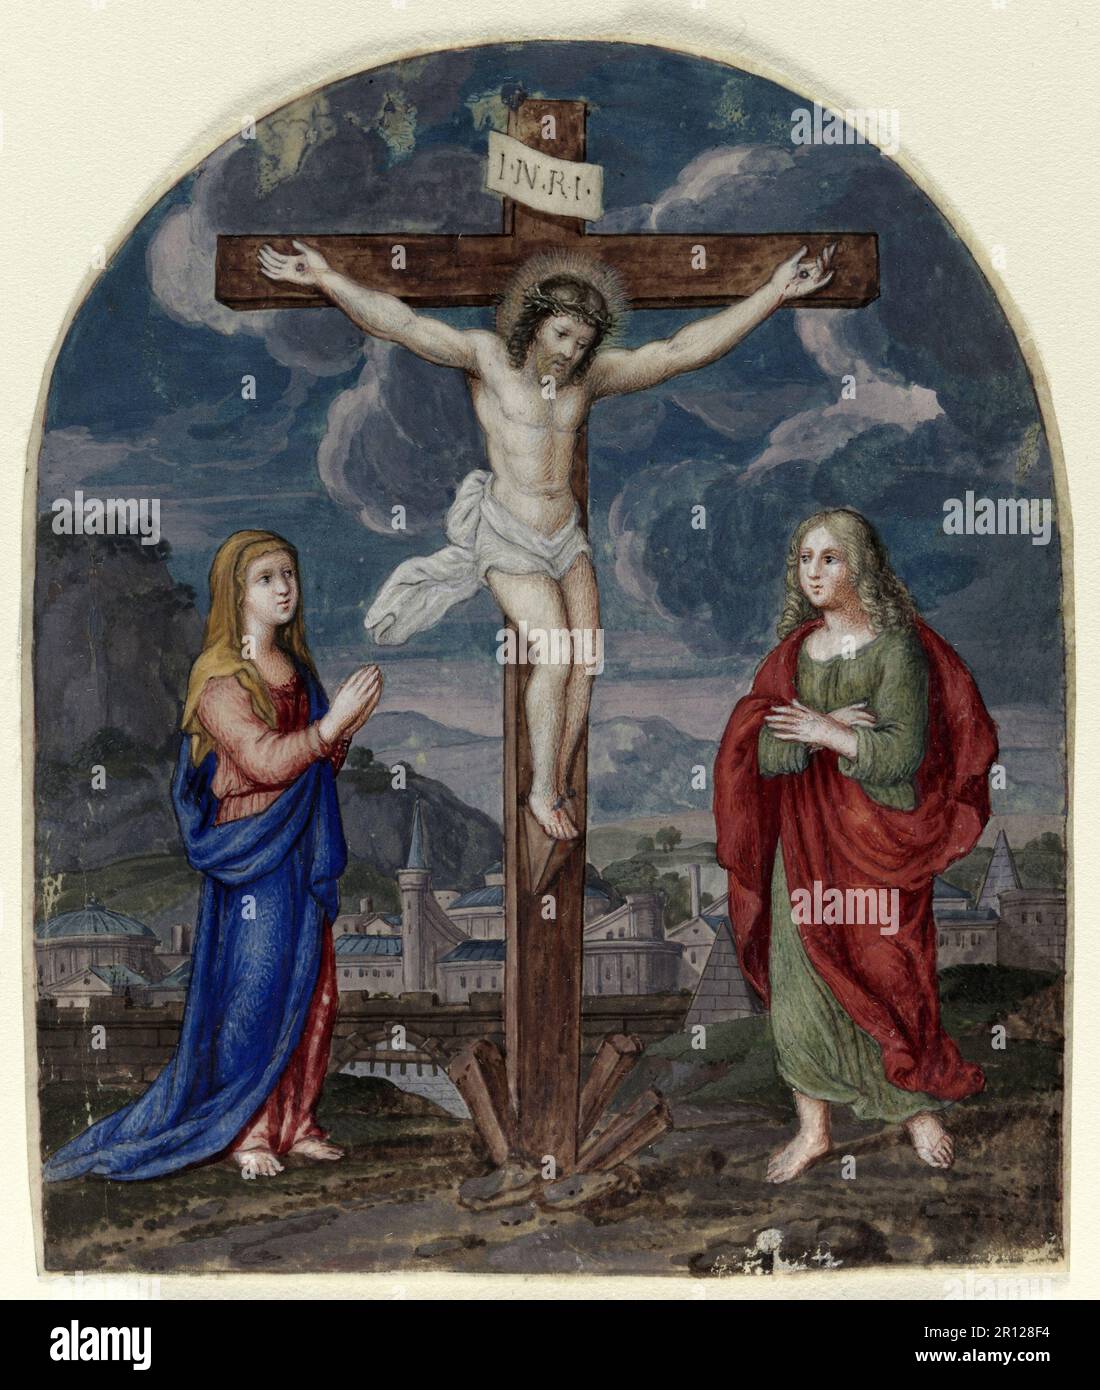 The Crucifixion, Execution, of Jesus of Nazareth, Christ, Good Friday, Golgotha, Miniature, cut out from a prayer book, c. 1540-1550, Flanders, Antwerp, Tempera on vellum, Historic, digitally restored reproduction from a 19th century original. Stock Photo